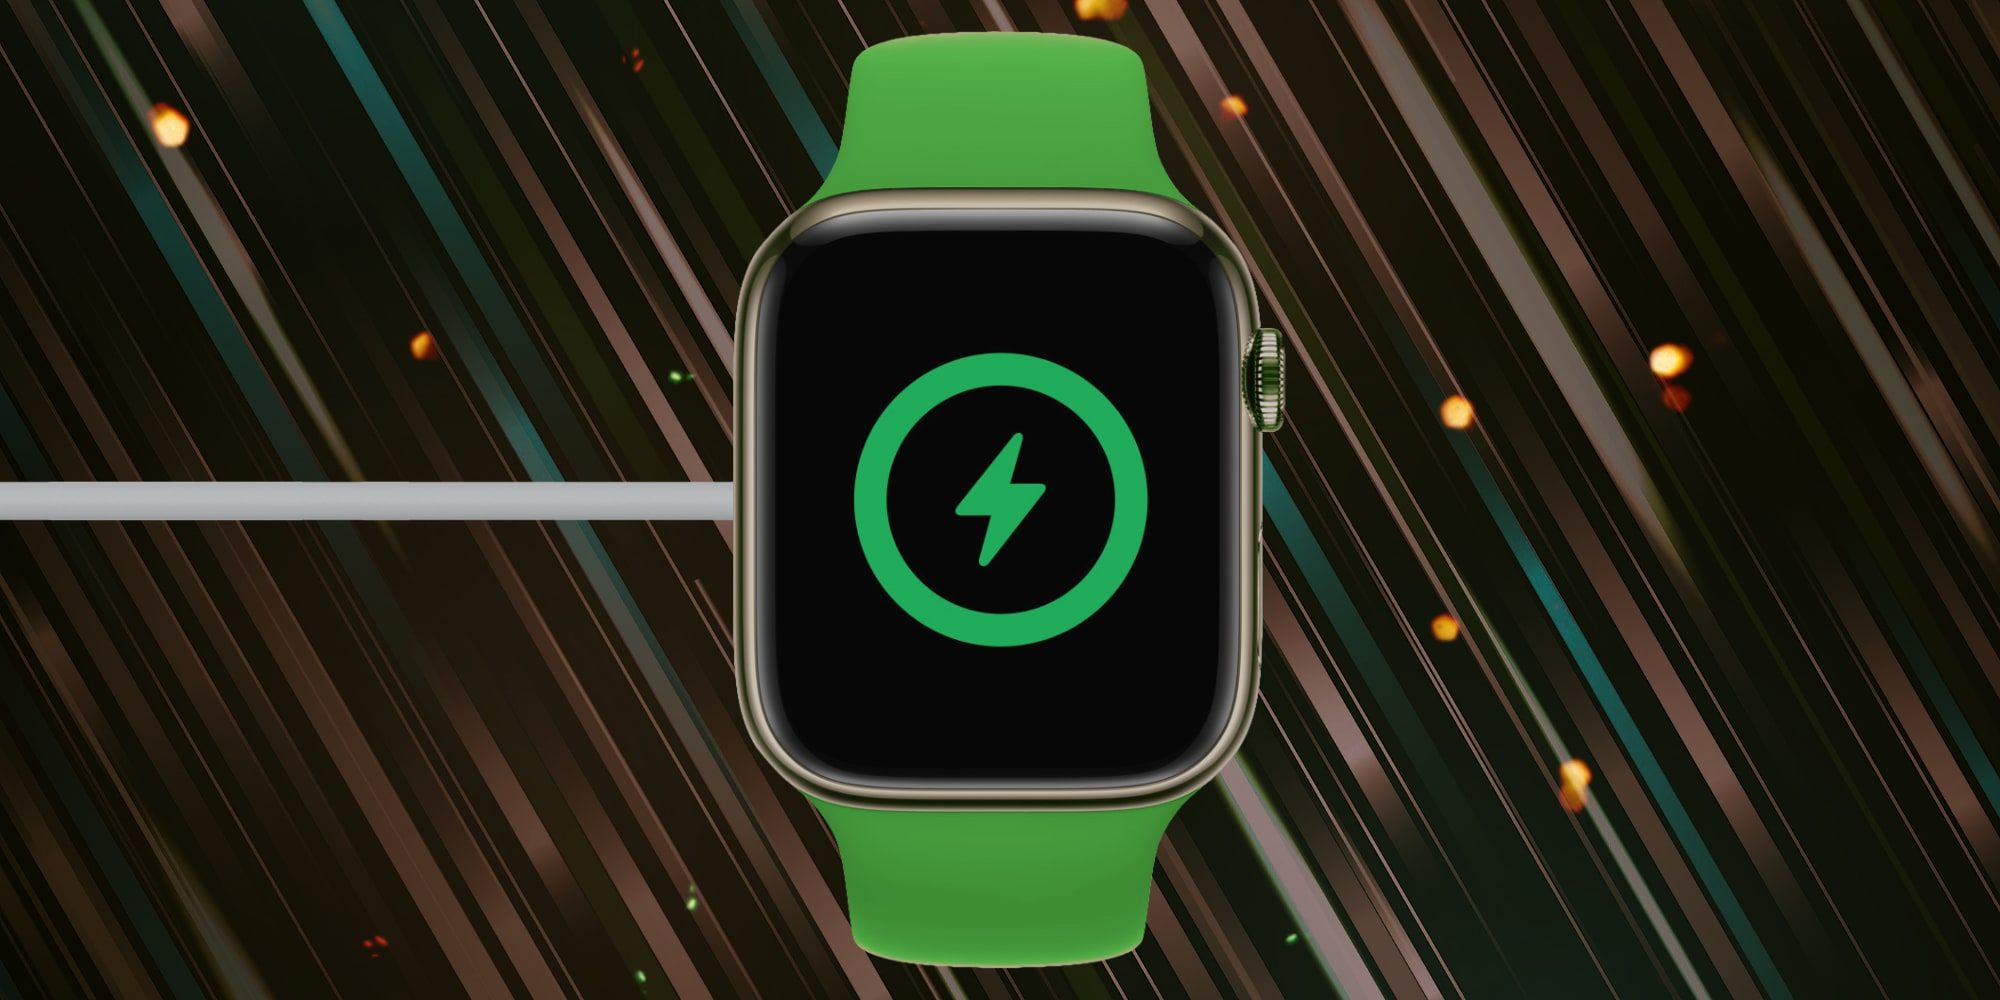 Image of an Apple Watch charging, with the charging logo on the screen.